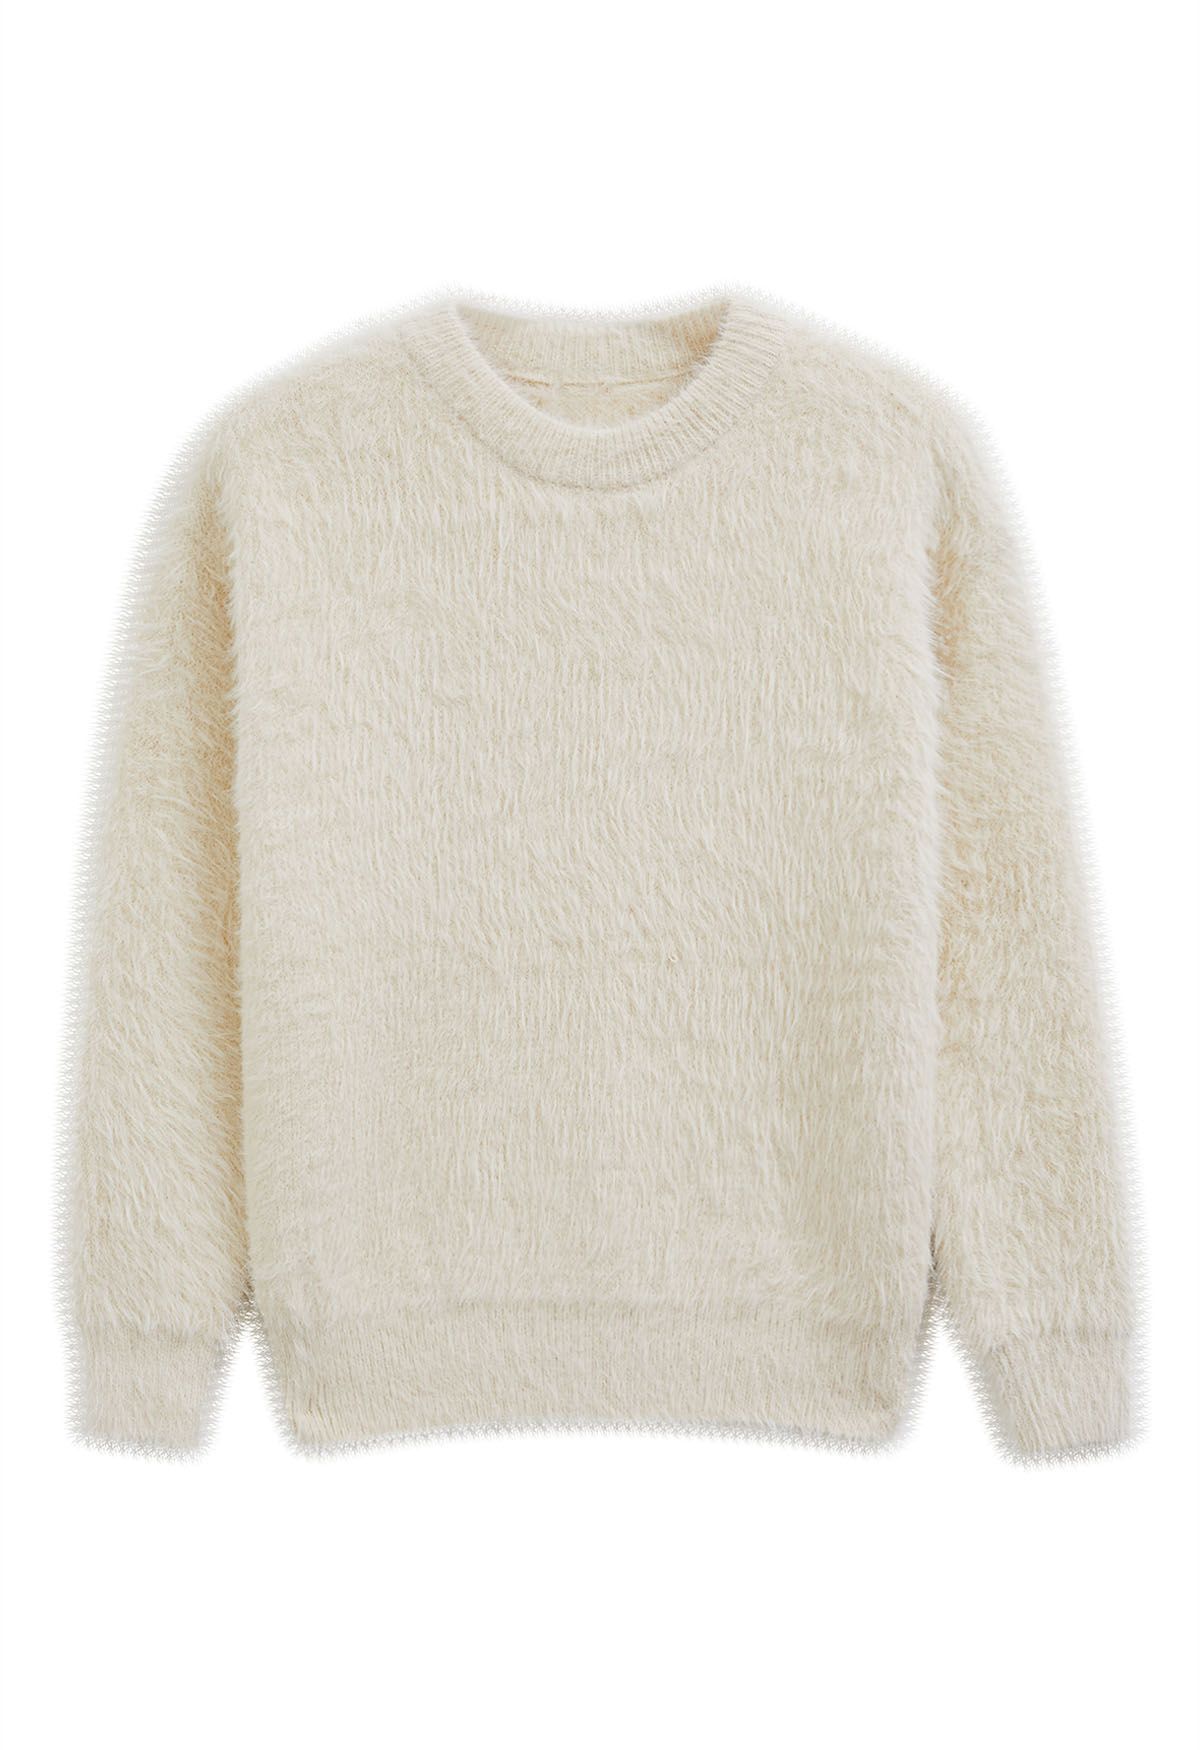 Solid Color Fuzzy Knit Sweater in Cream | Chicwish